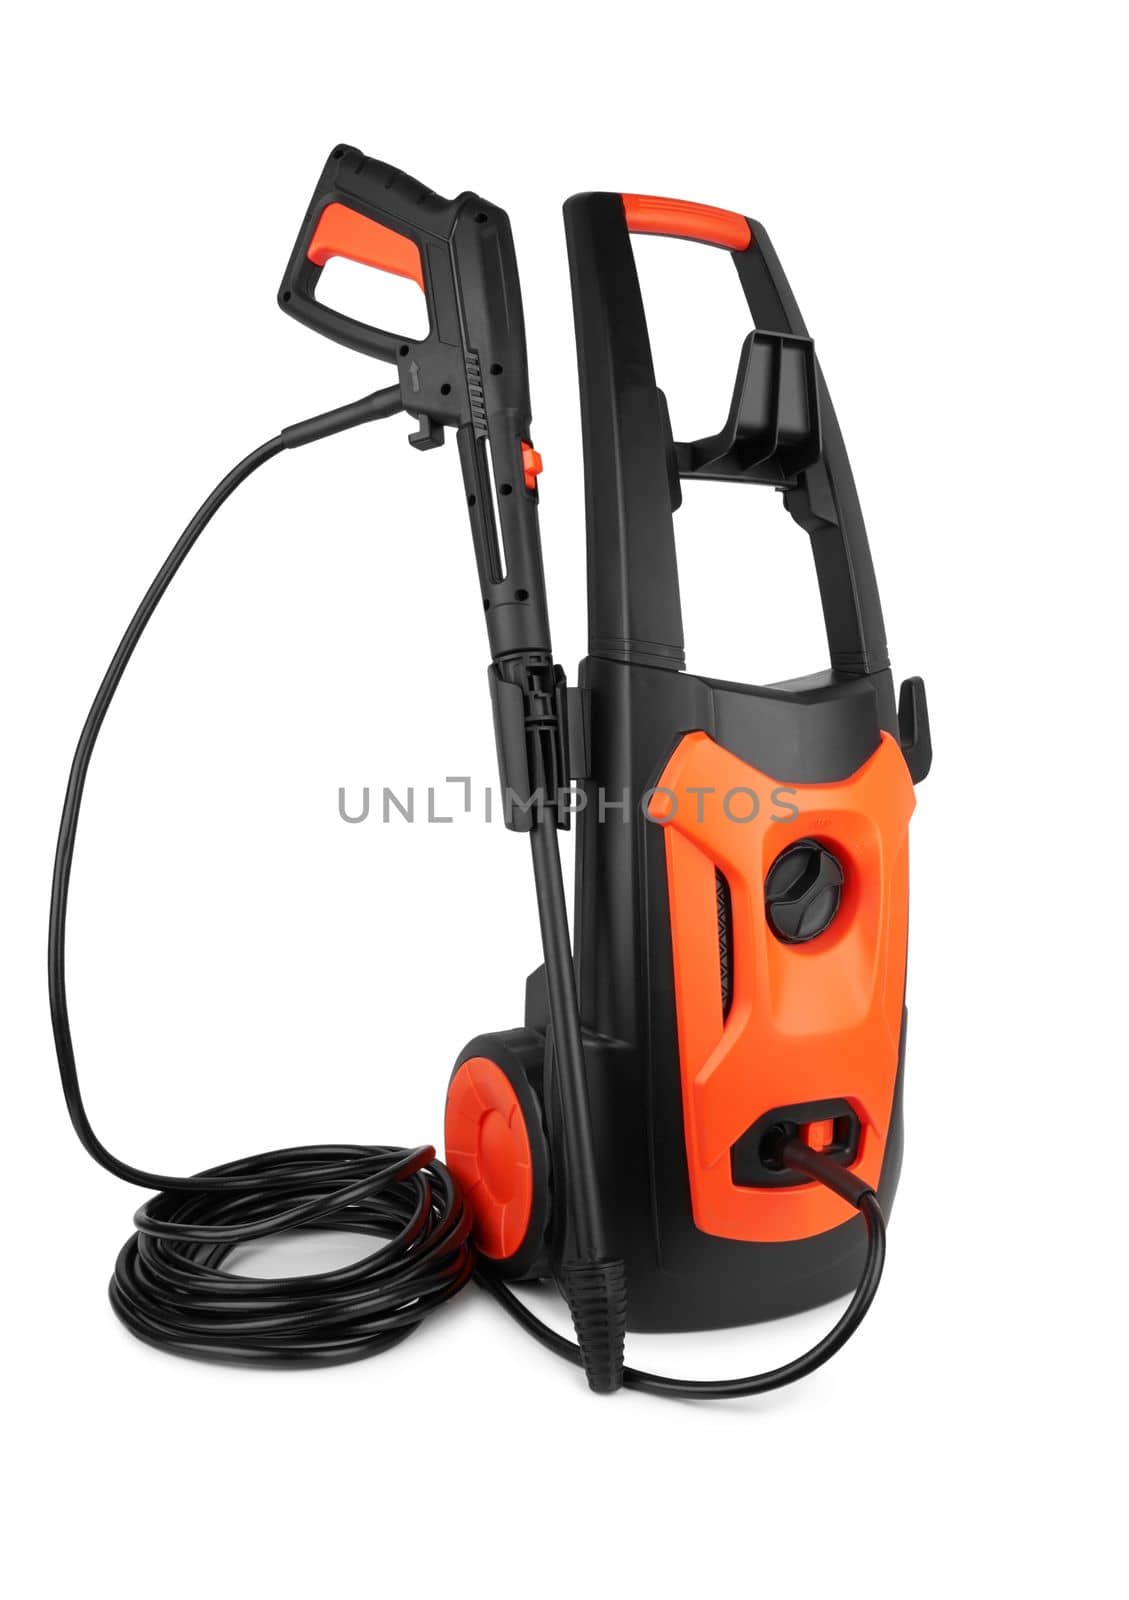 High pressure washer by pioneer111